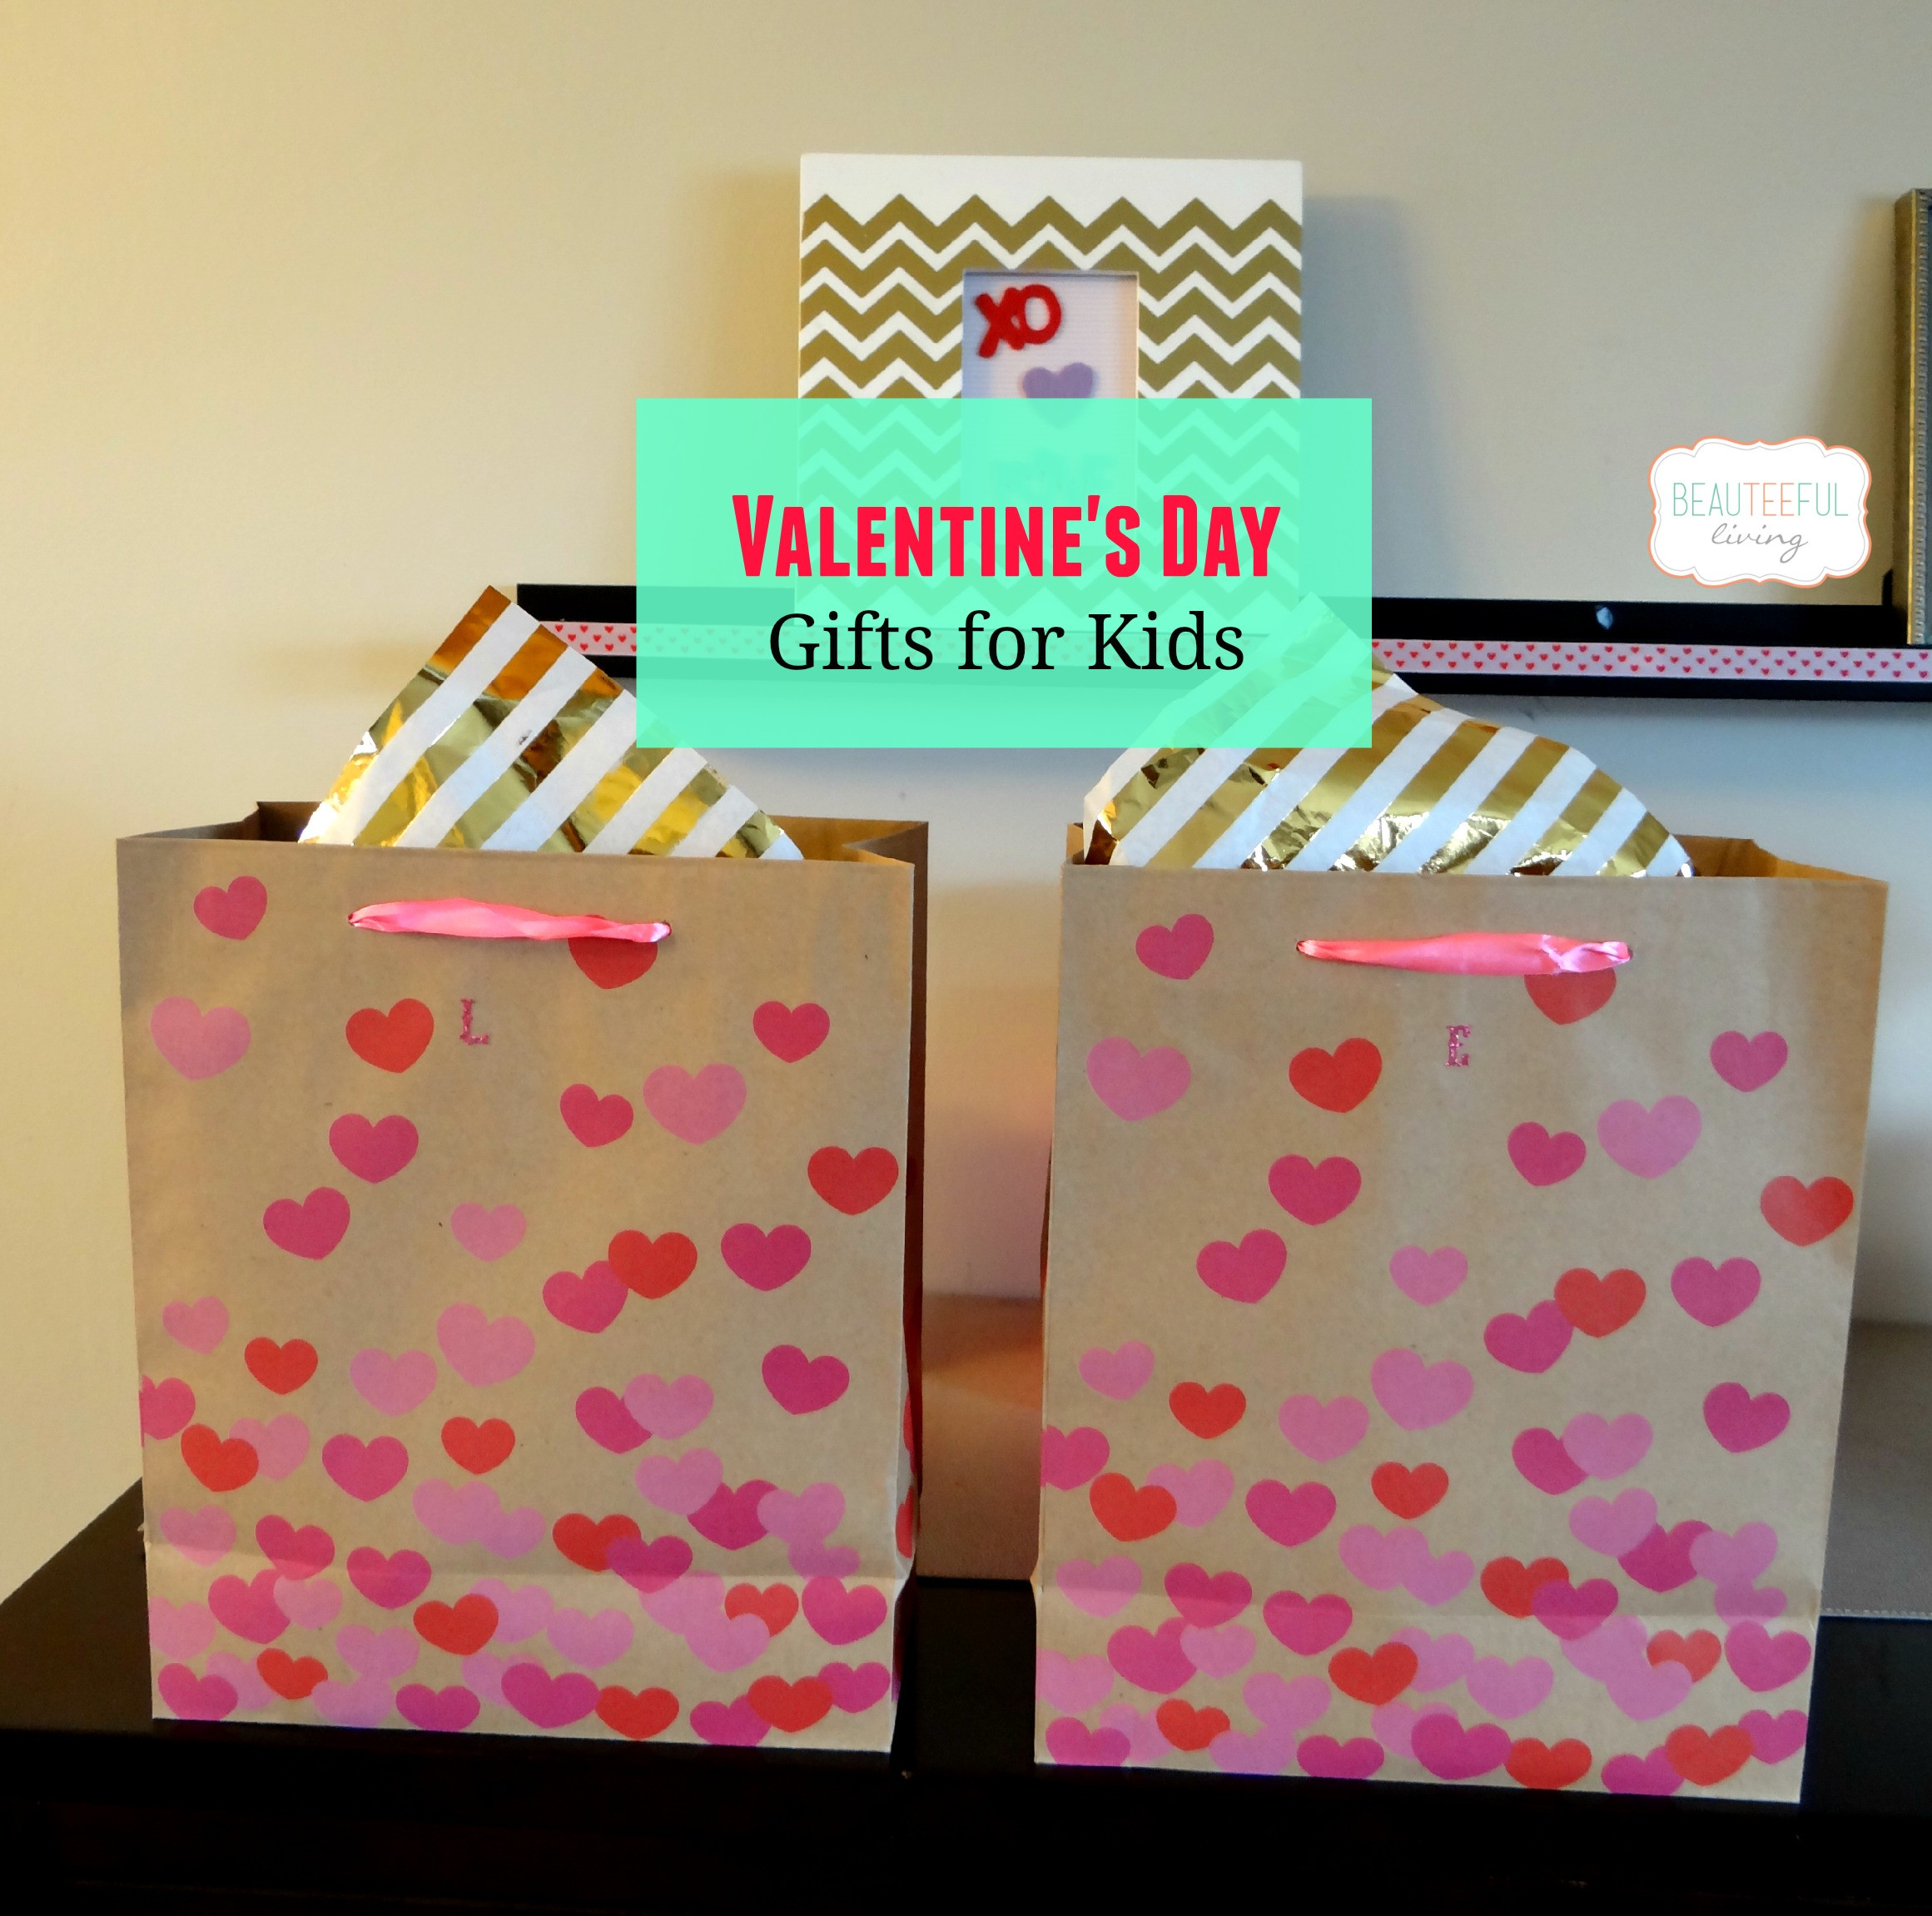 Valentines Gift Ideas For Toddlers
 Valentine s Day Gifts for Kids BEAUTEEFUL Living